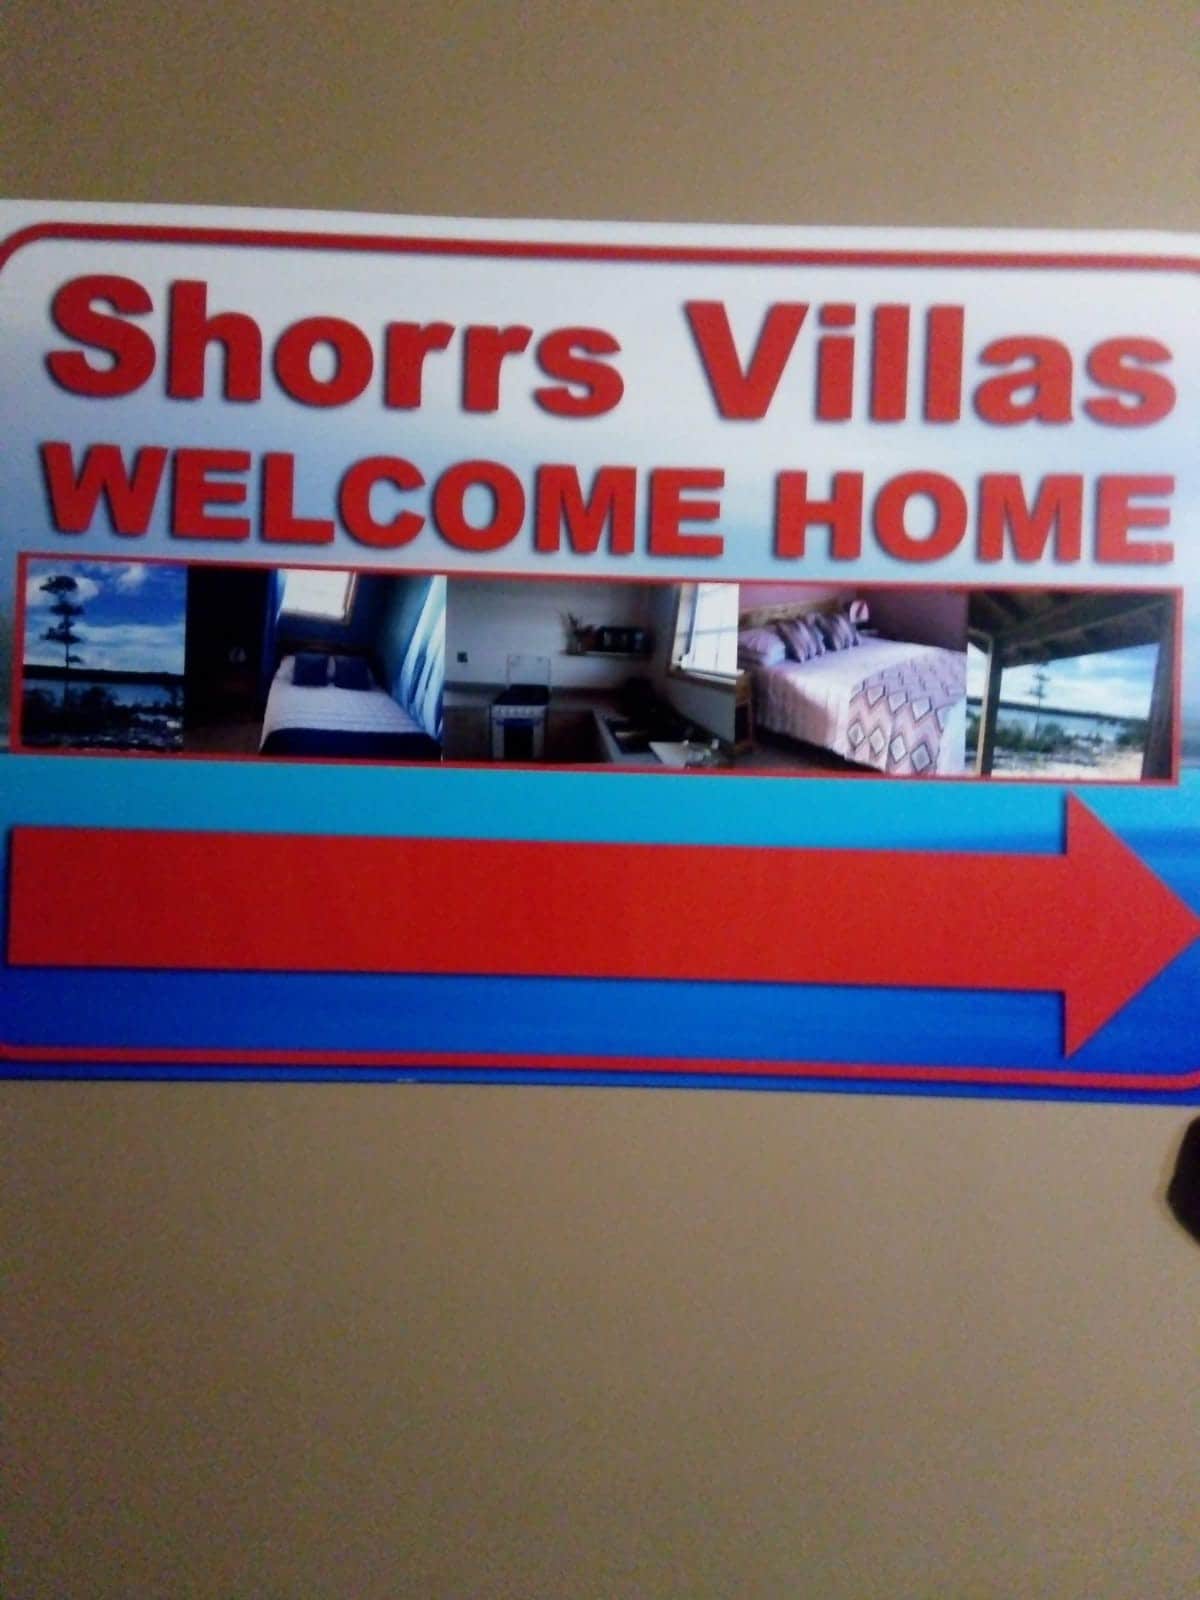 SHORRS VILLAS #2. PEACE AND TRANQUILITY.